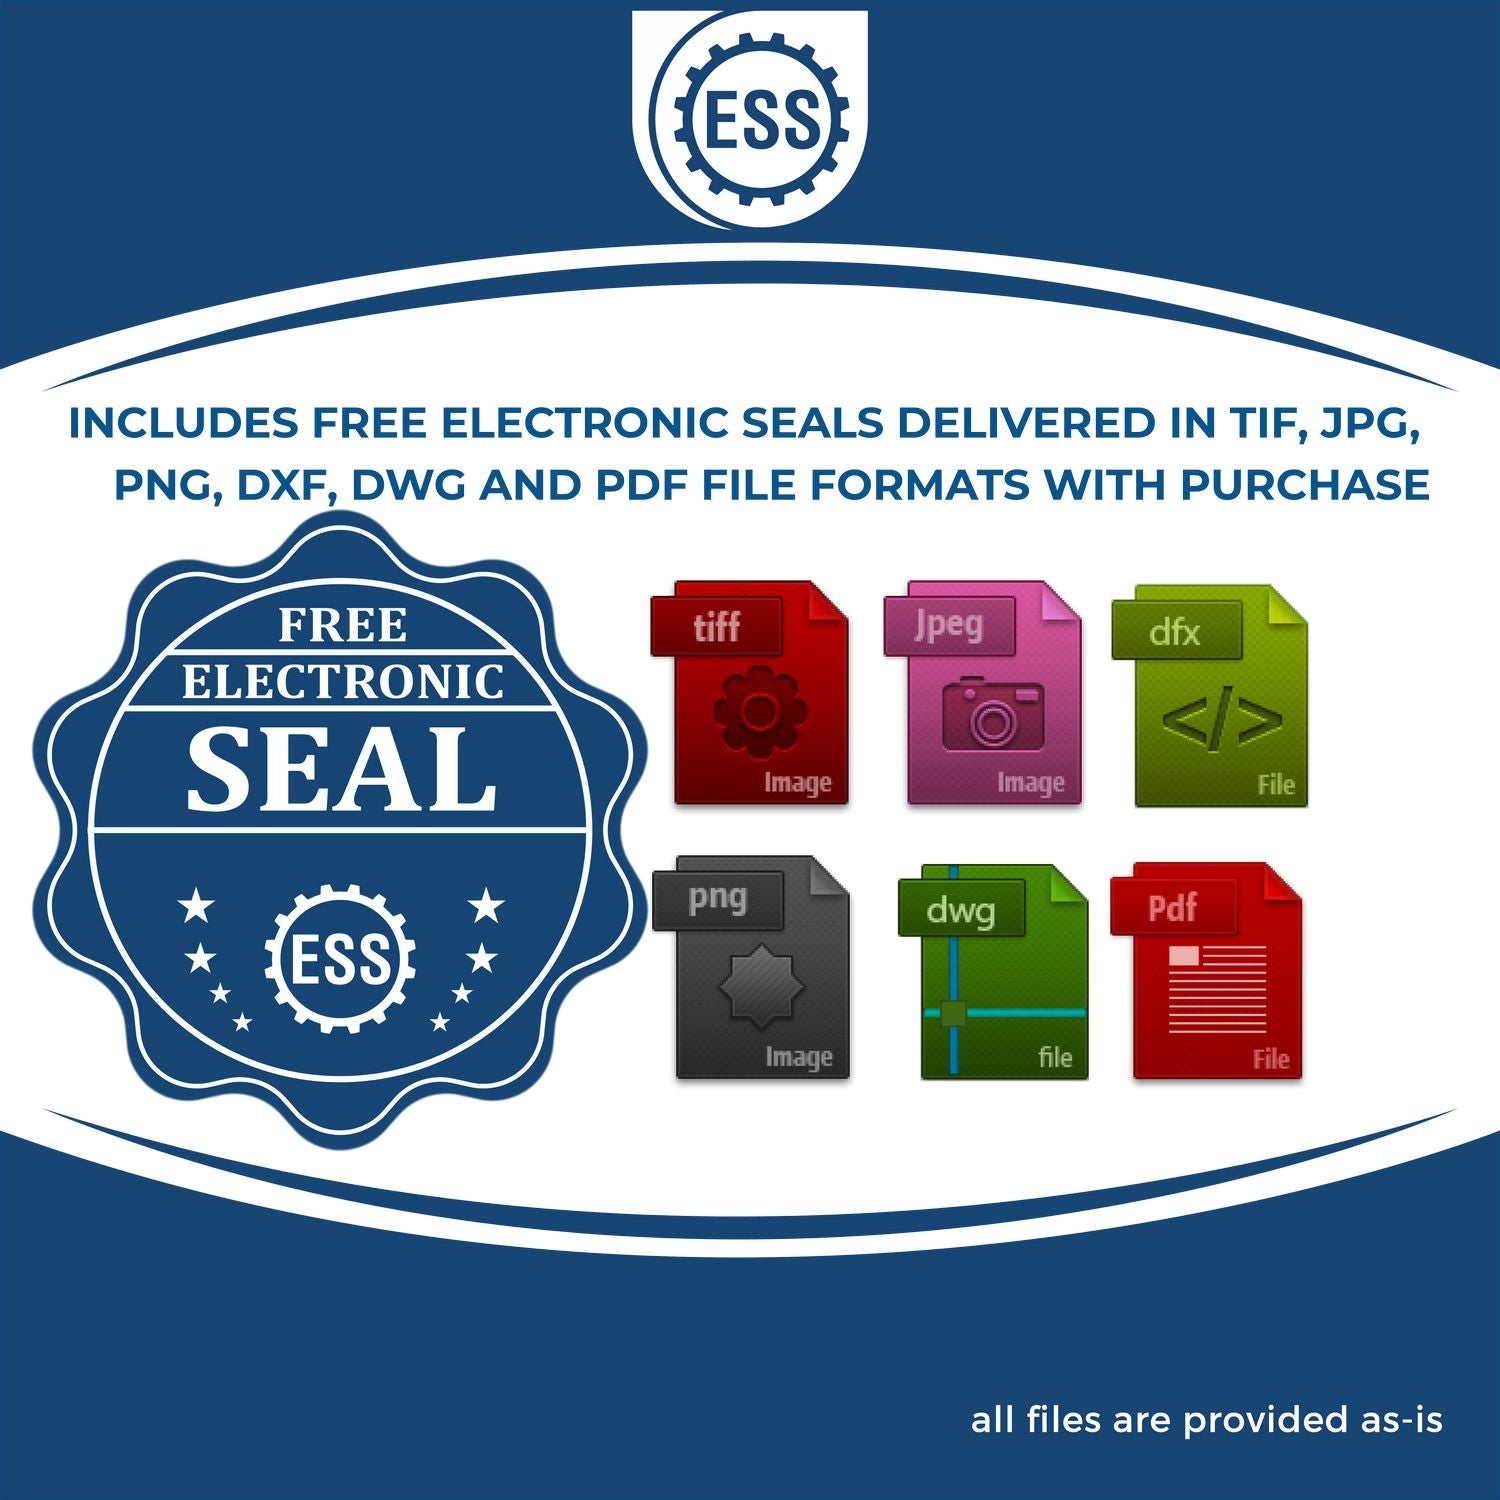 An infographic for the free electronic seal for the Premium MaxLight Pre-Inked Wisconsin Engineering Stamp illustrating the different file type icons such as DXF, DWG, TIF, JPG and PNG.